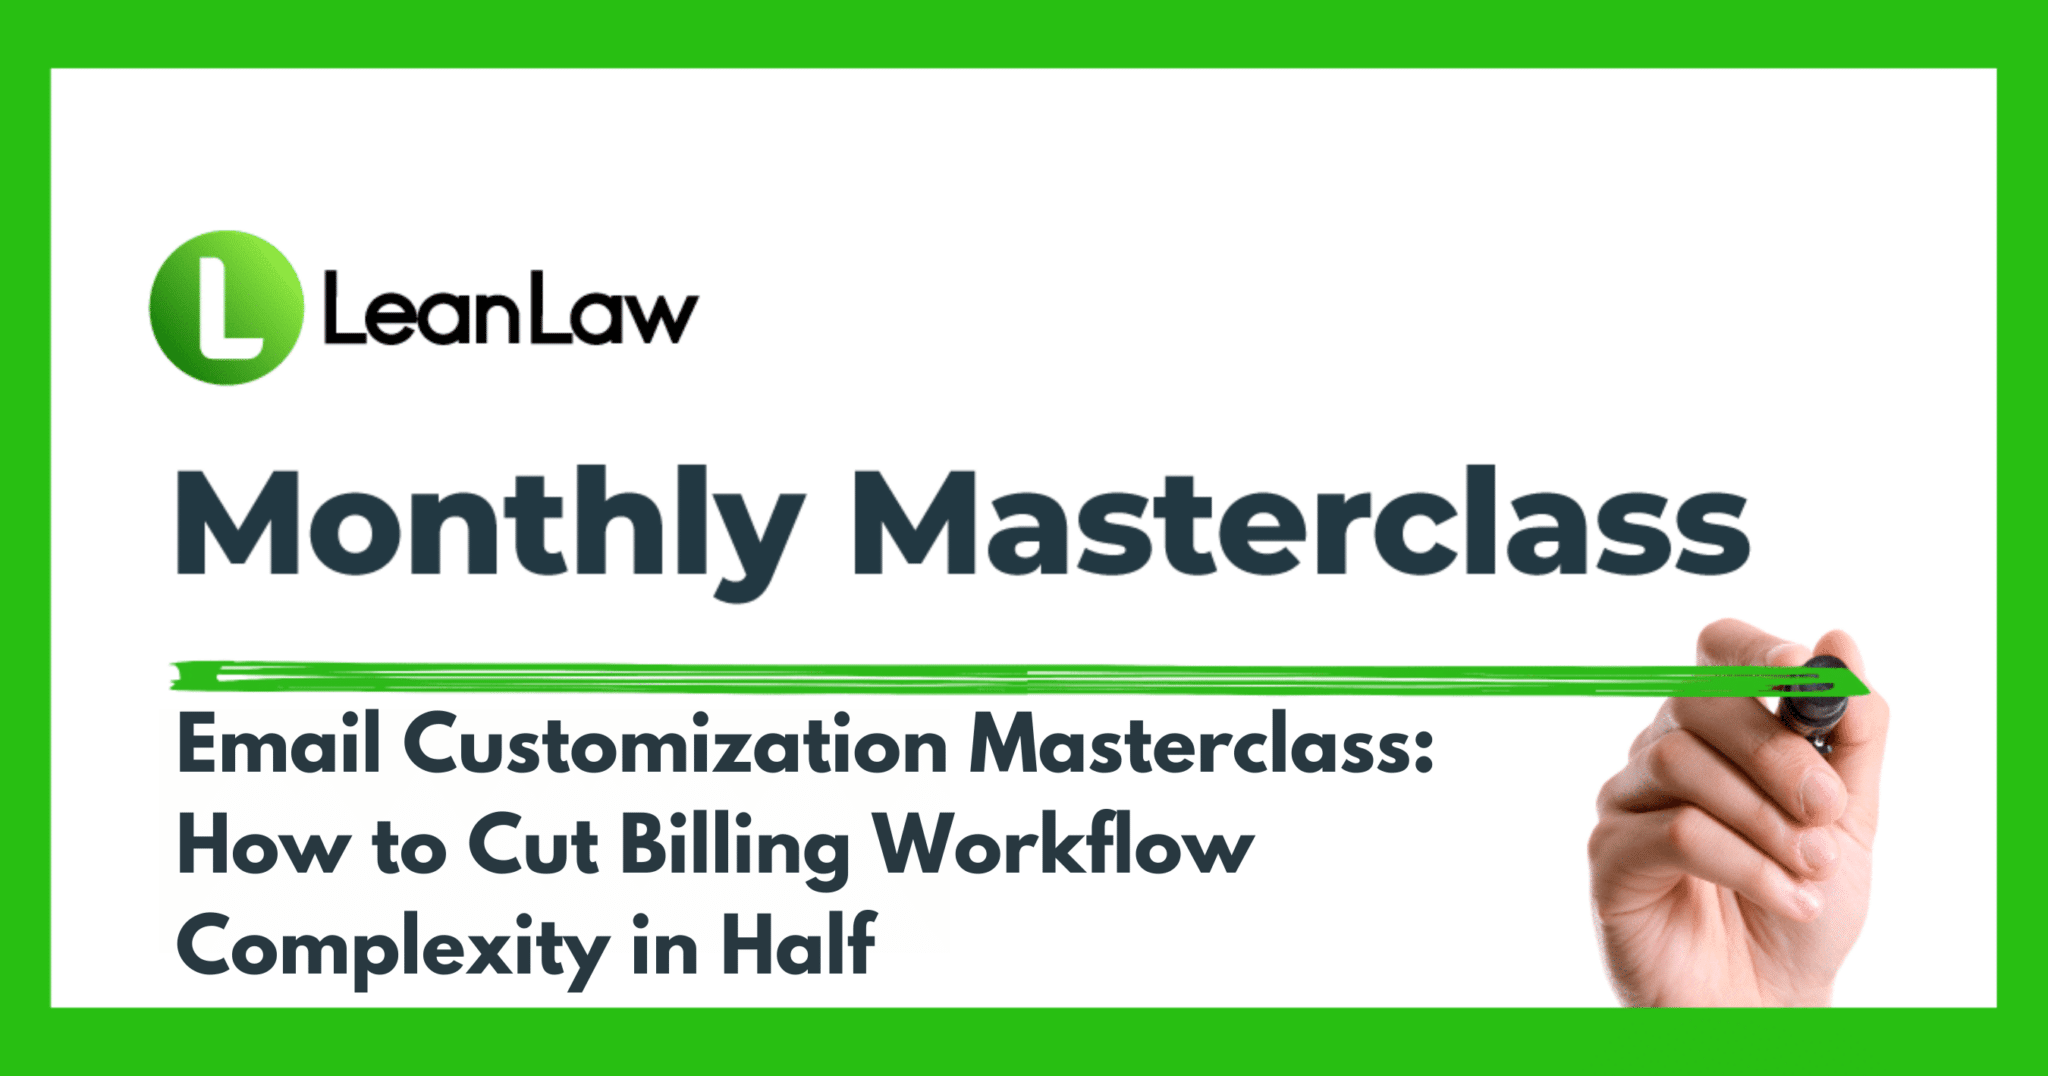 Email Customization Masterclass: How to Cut Billing Workflow Complexity in Half